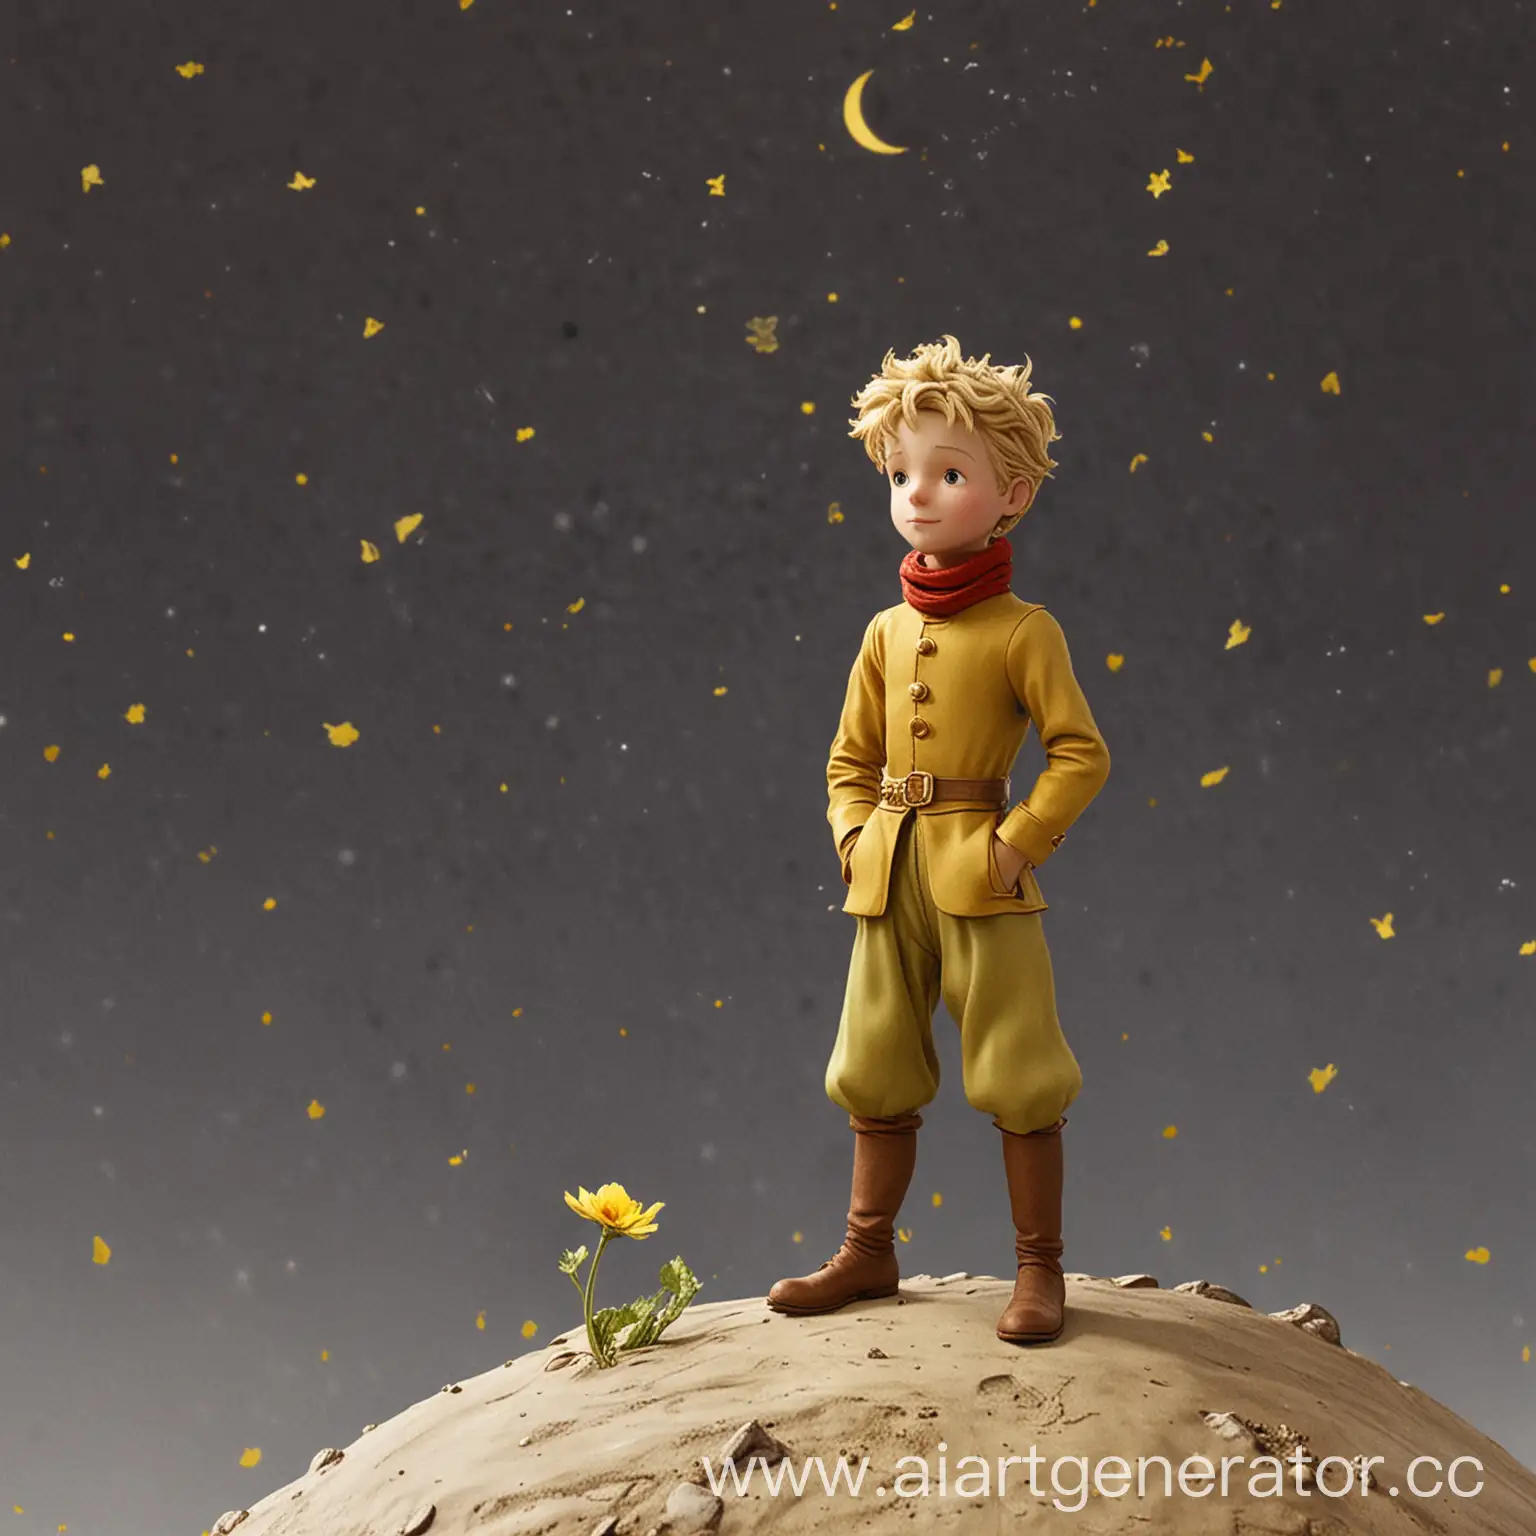 Adventures-of-the-Little-Prince-Exploring-Cosmic-Worlds